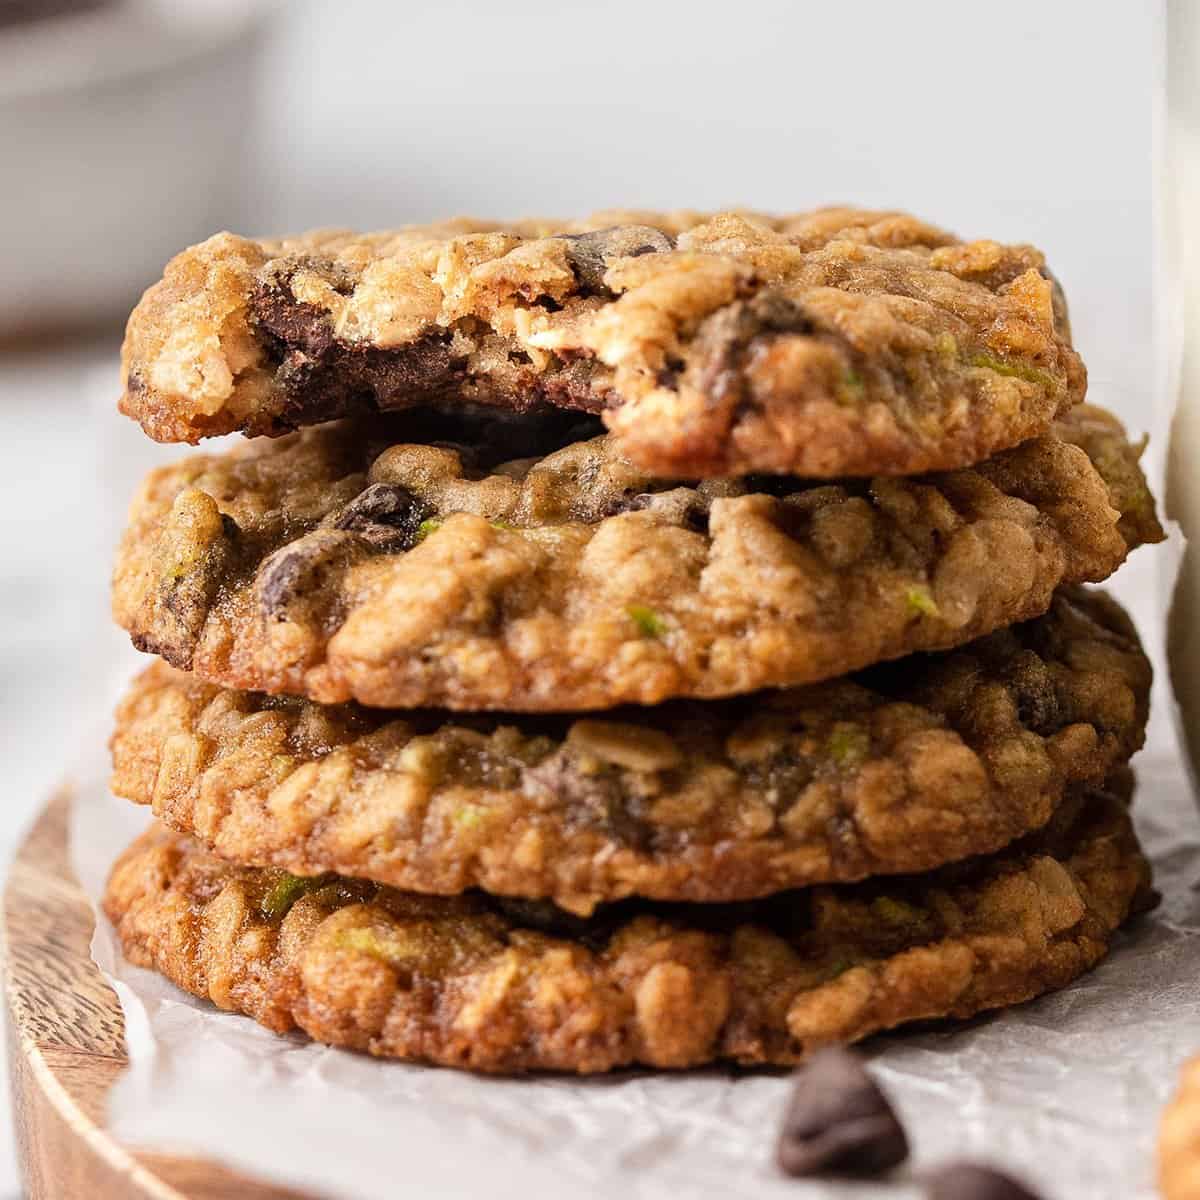 a stack of 4 Zucchini Chocolate Chip Cookies - the top one has a bite taken out of it